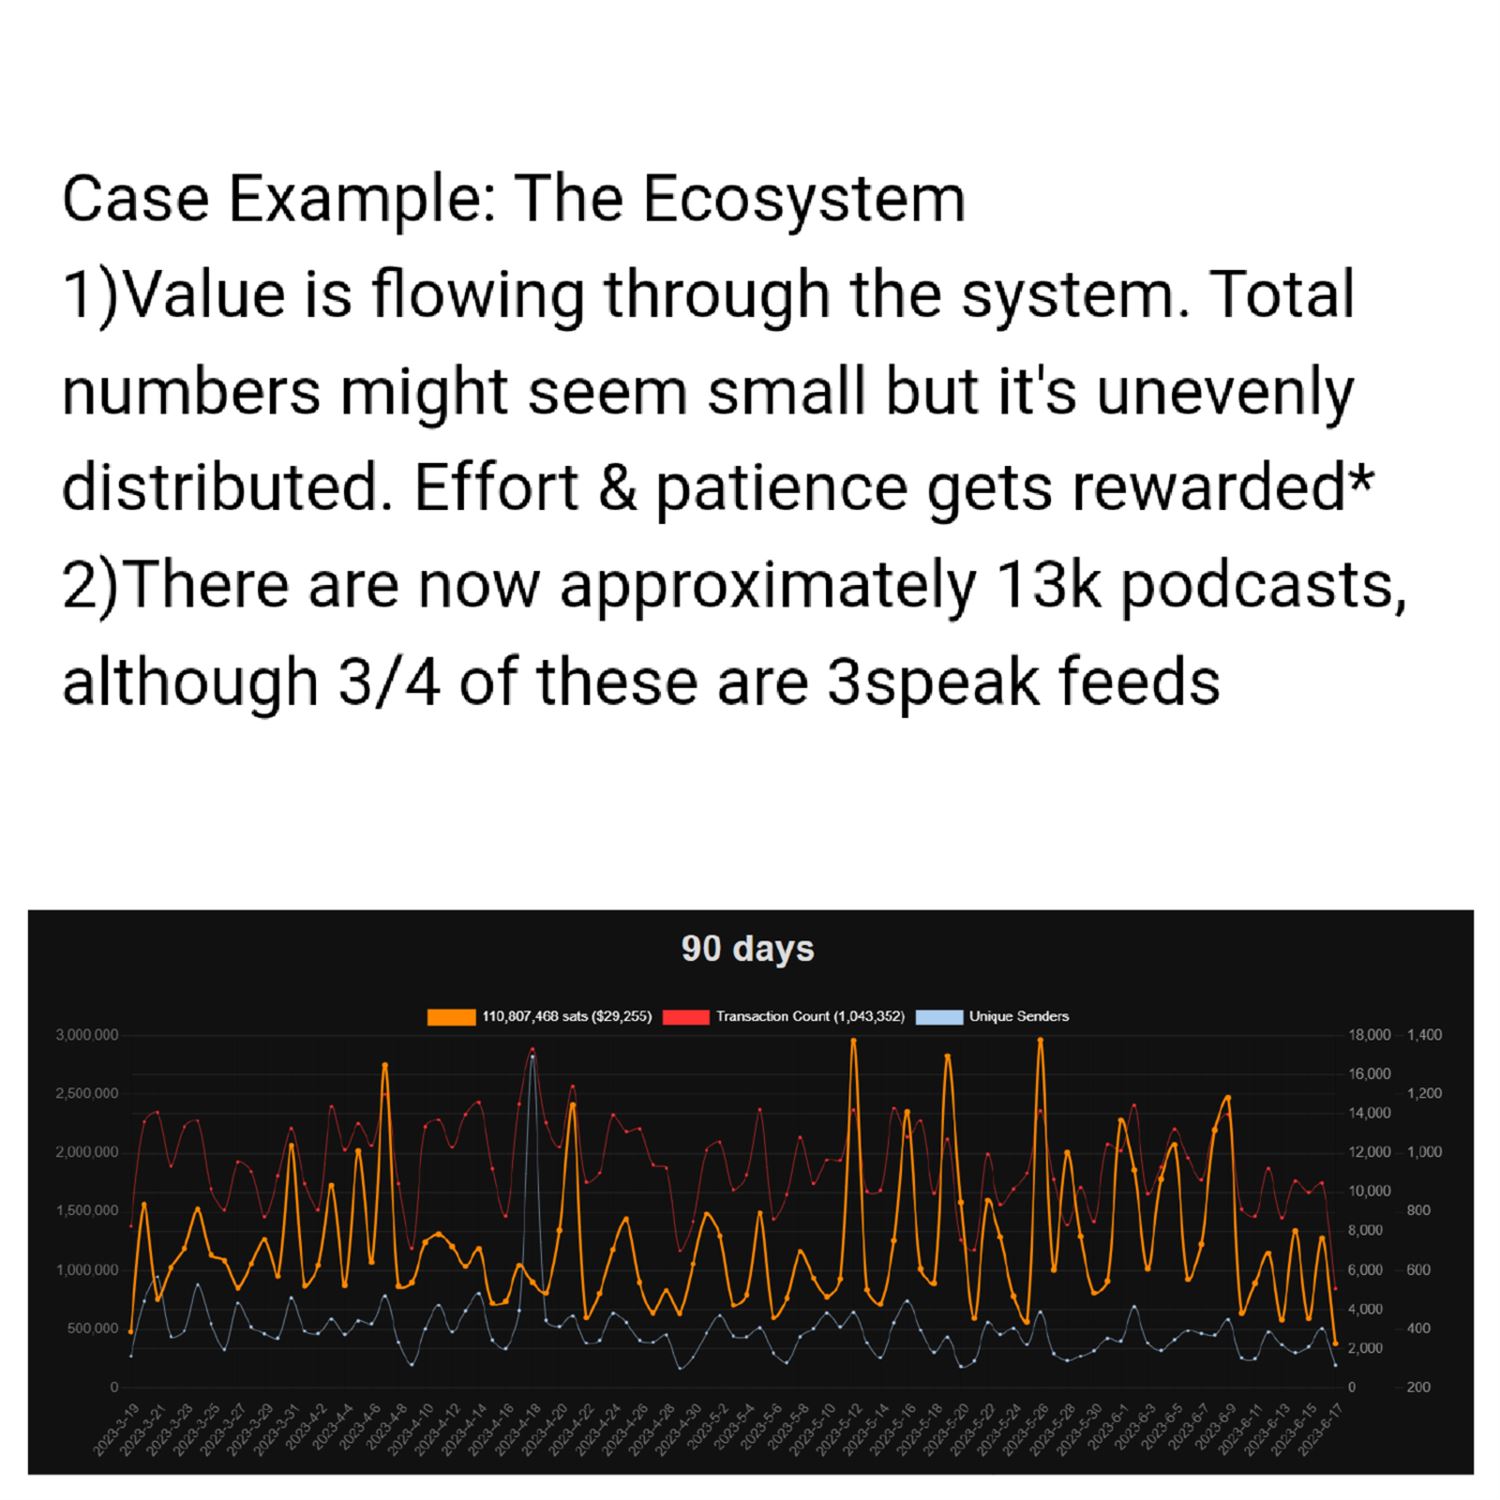 Case Example: The ecosystem